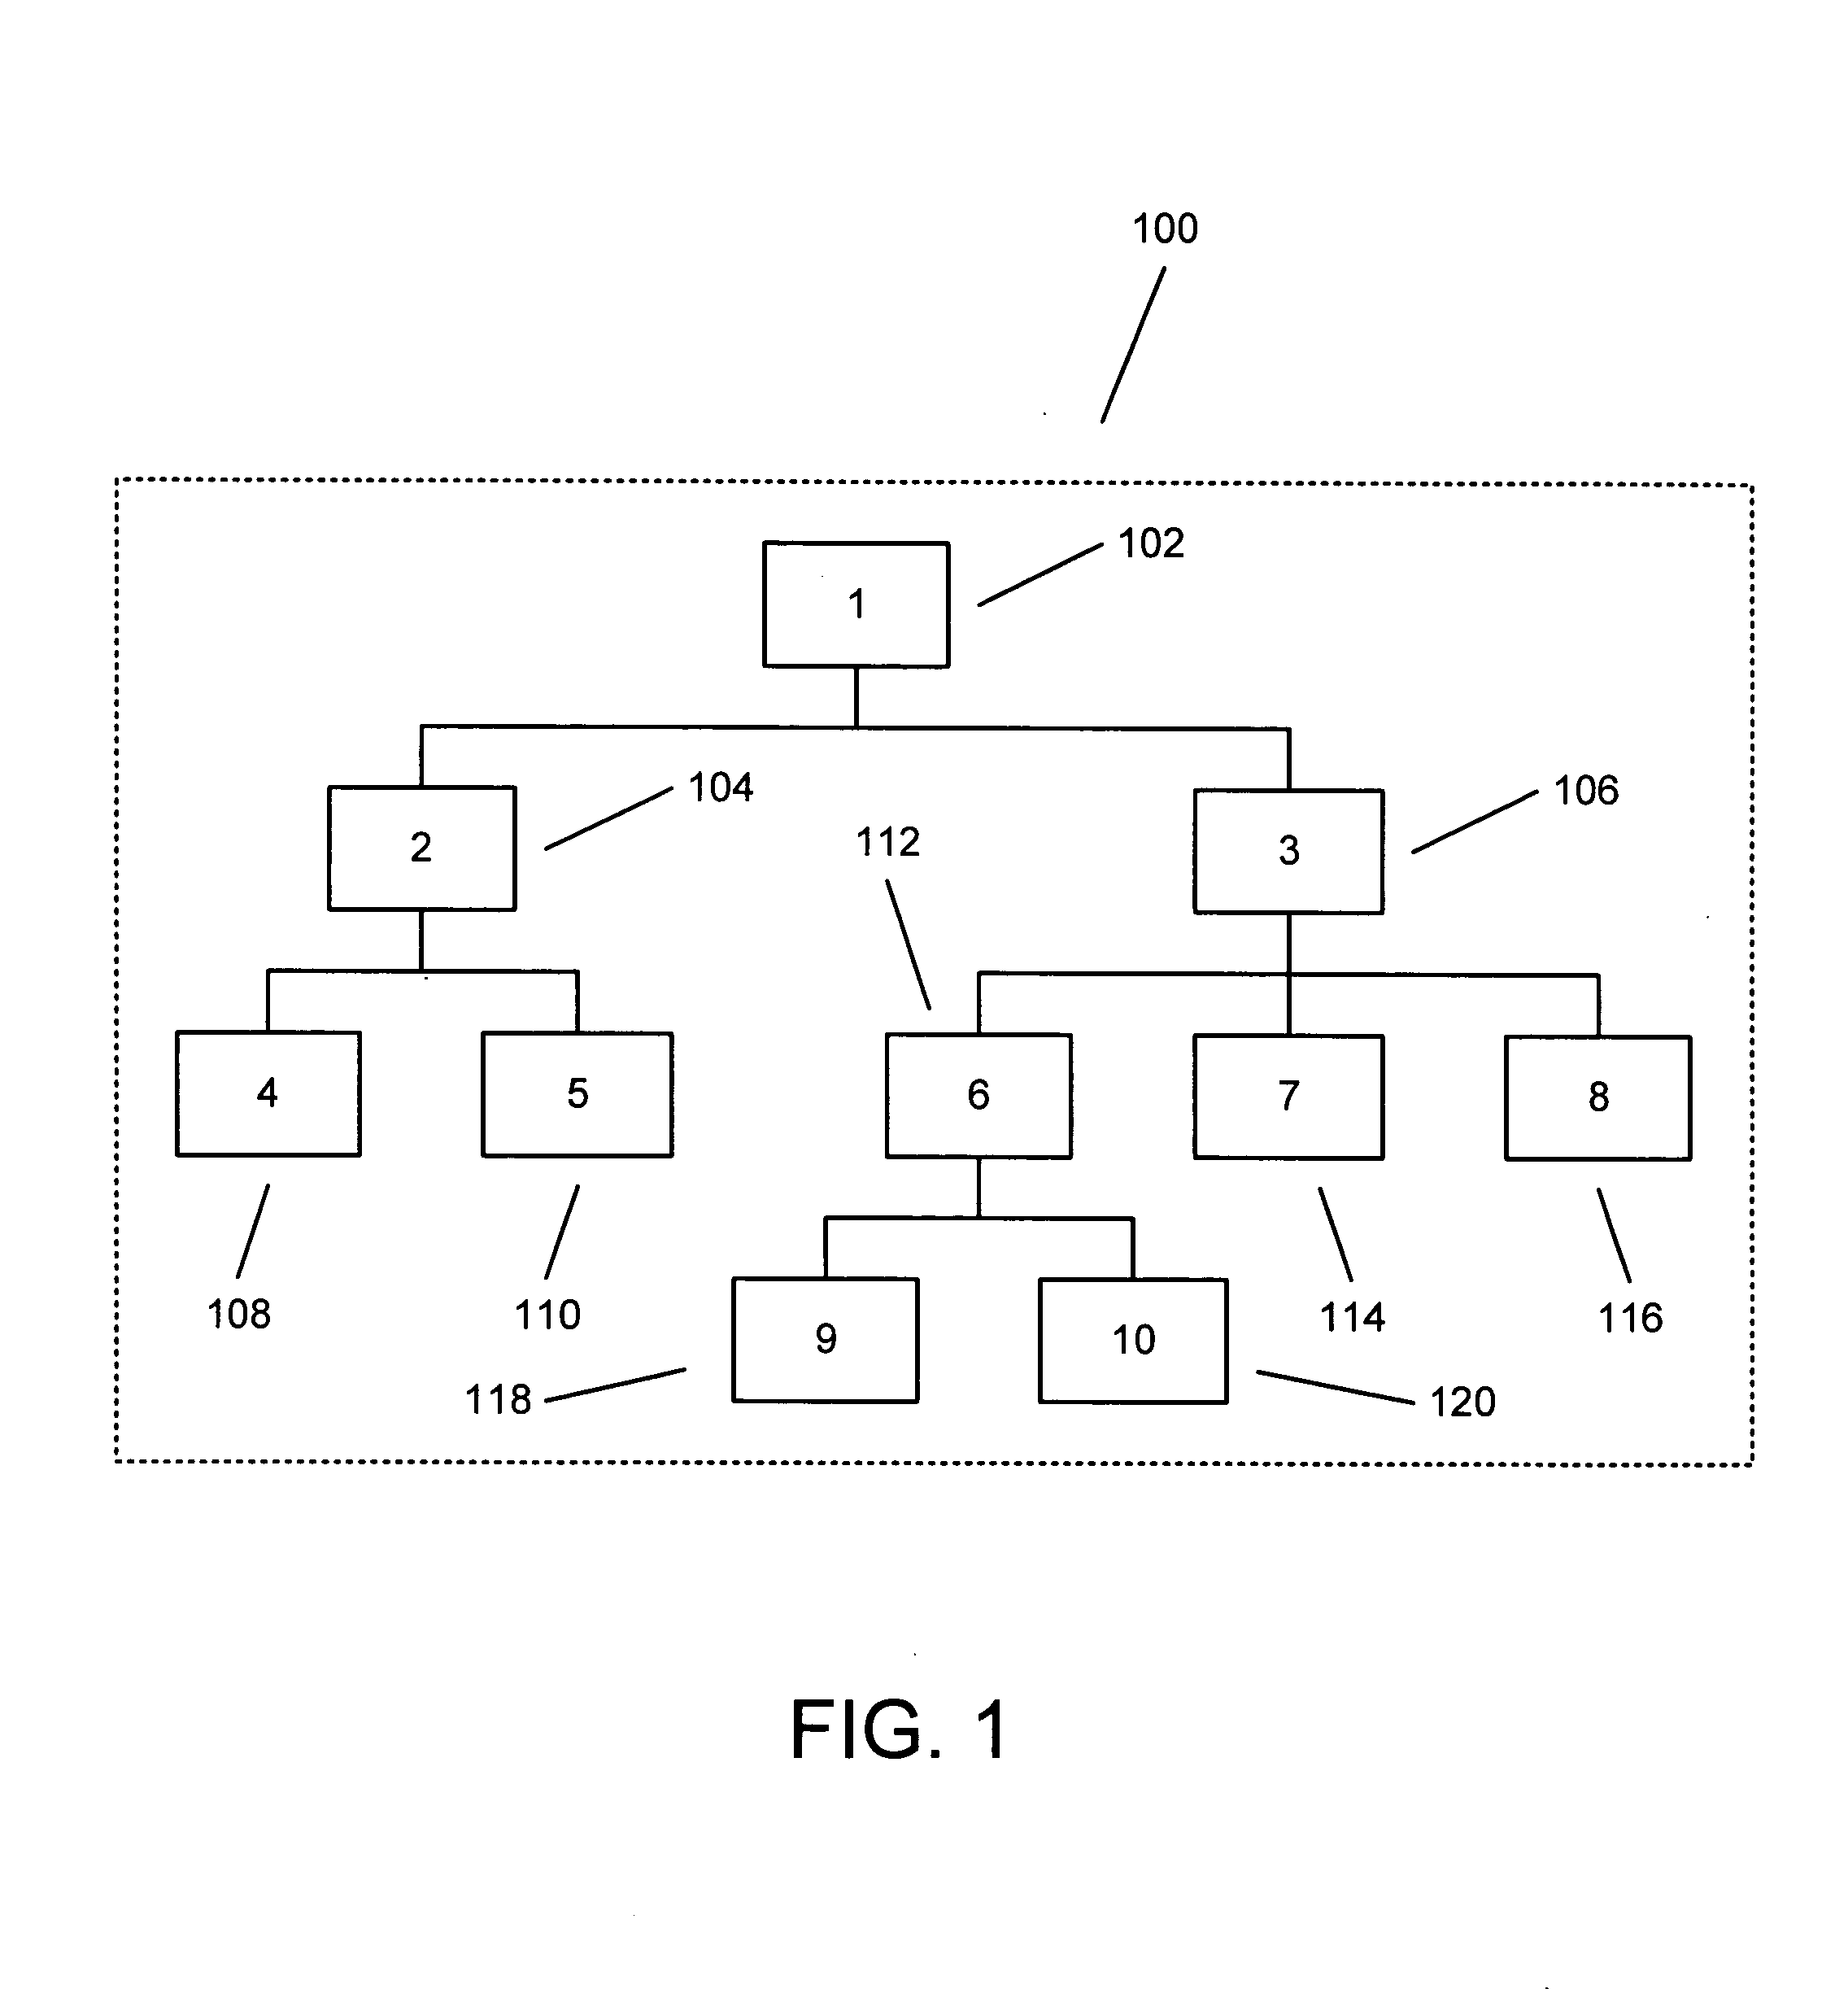 Navigational learning in a structured transaction processing system